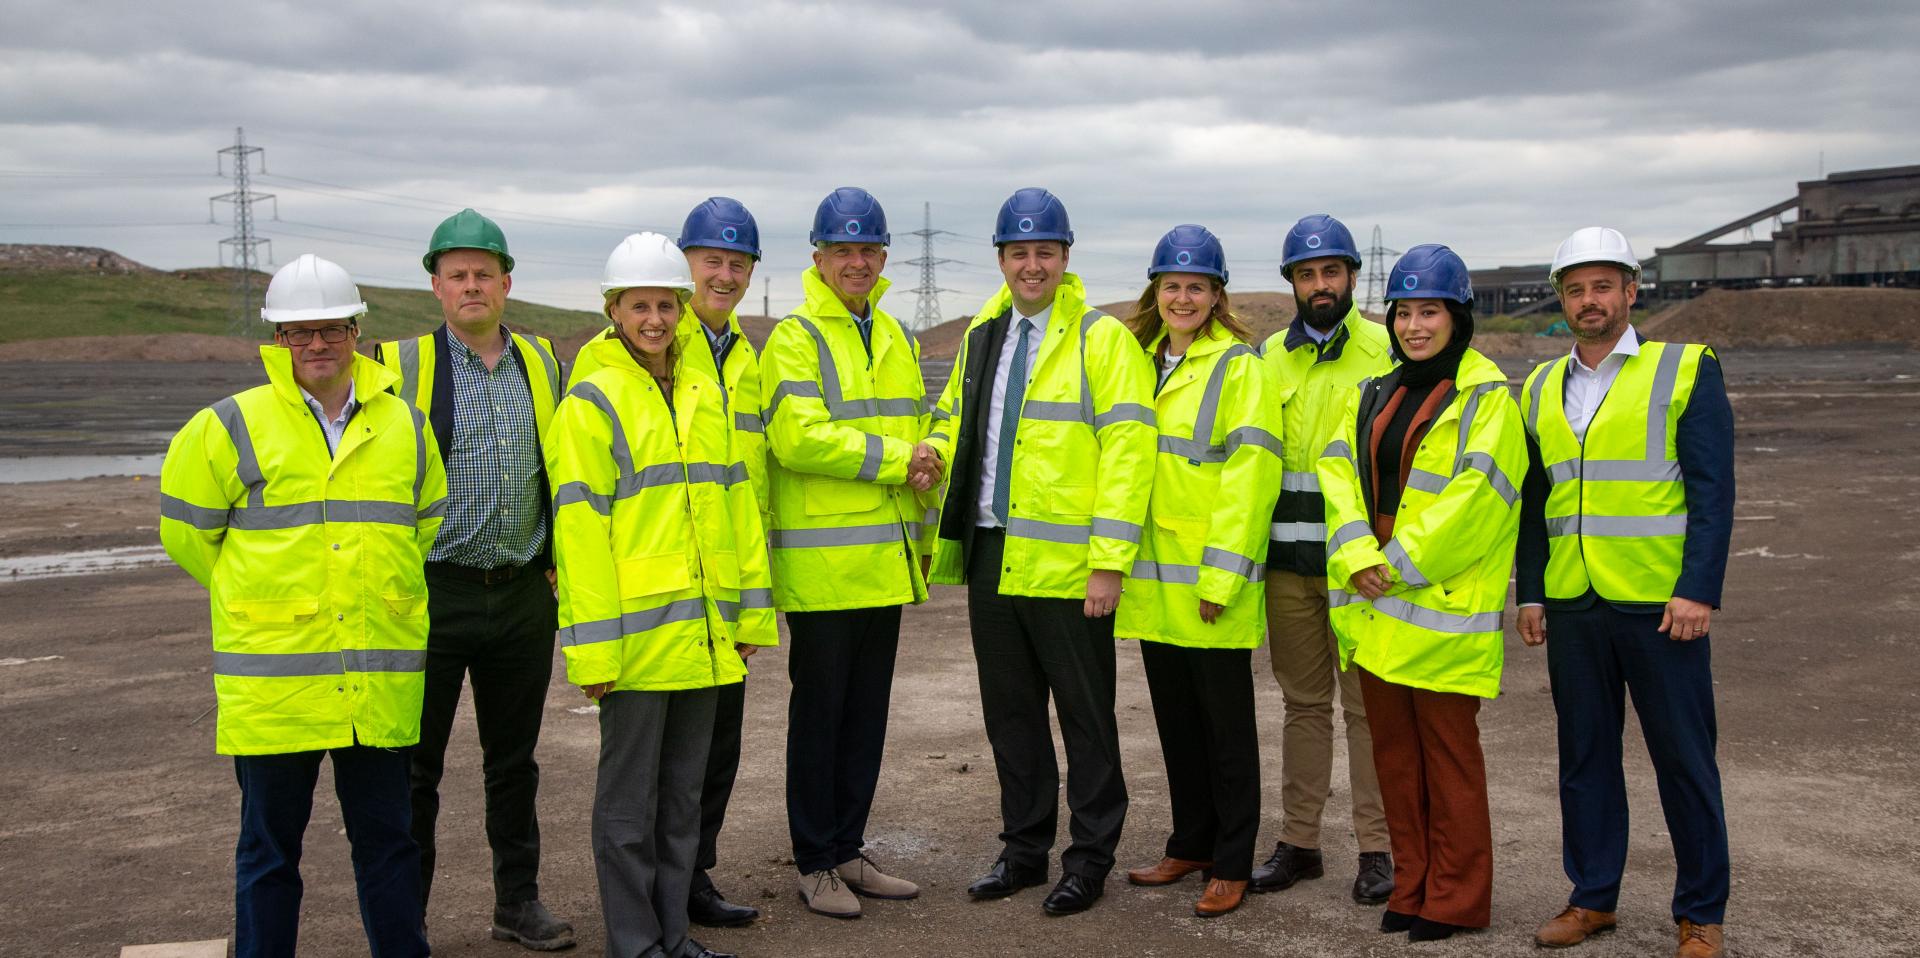 Mr Ben Houchen, Tees Valley Mayor (centre right) shaking hands with Søren Jacobsen, Dimeta CEO (centre left) at the Teesworks site with Matt Johnson, Teesworks, Development Director (far right) and other team members